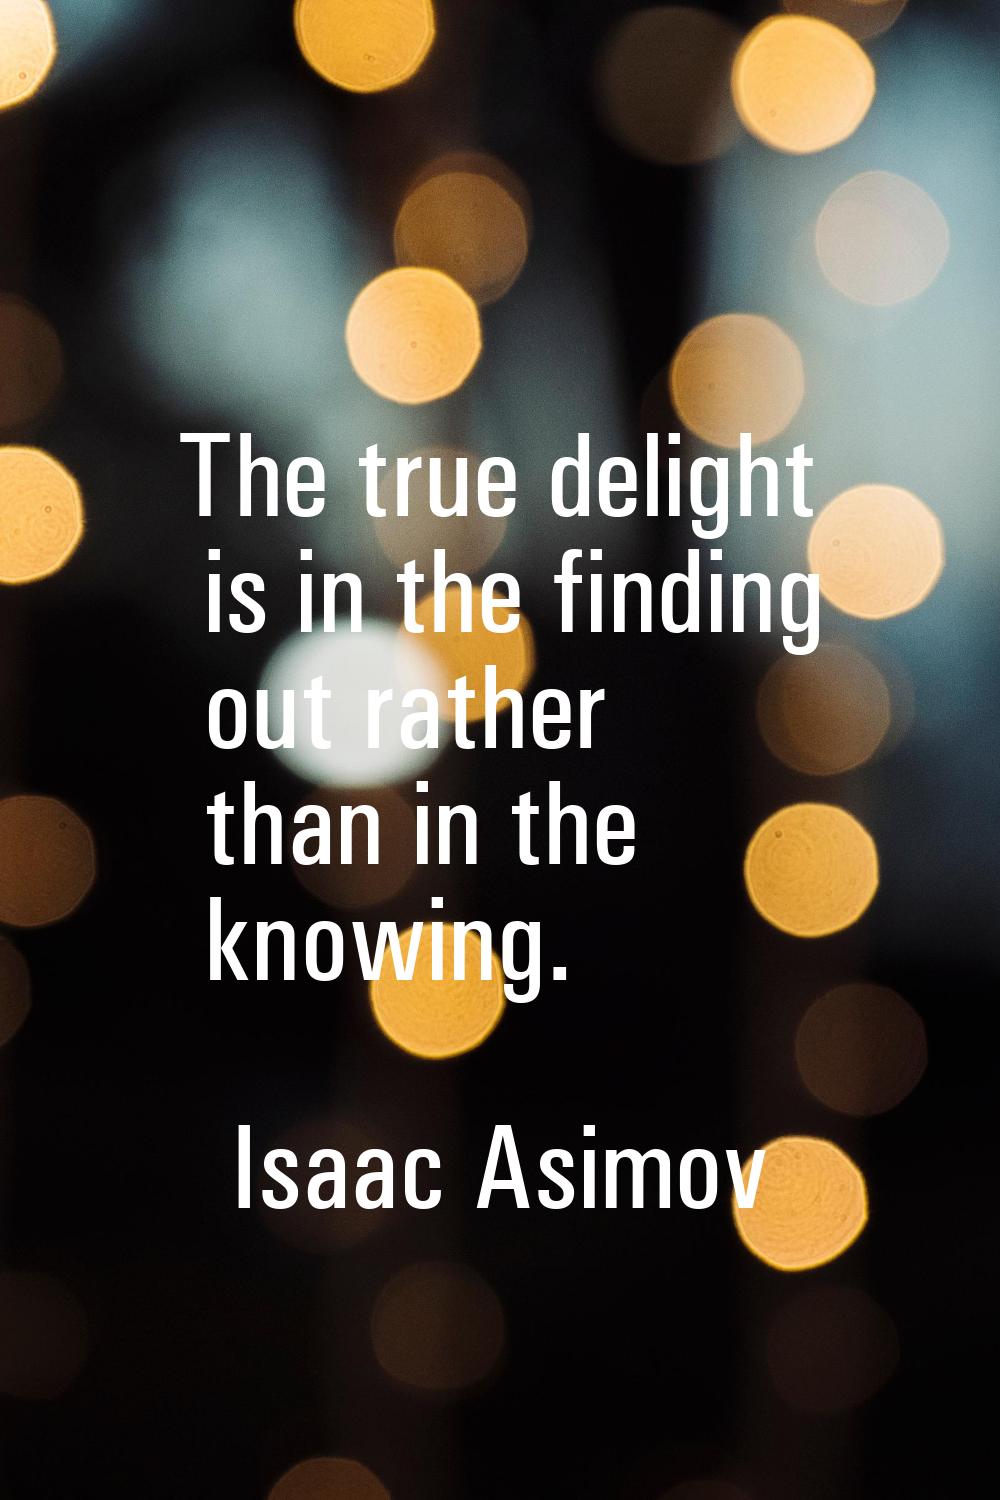 The true delight is in the finding out rather than in the knowing.